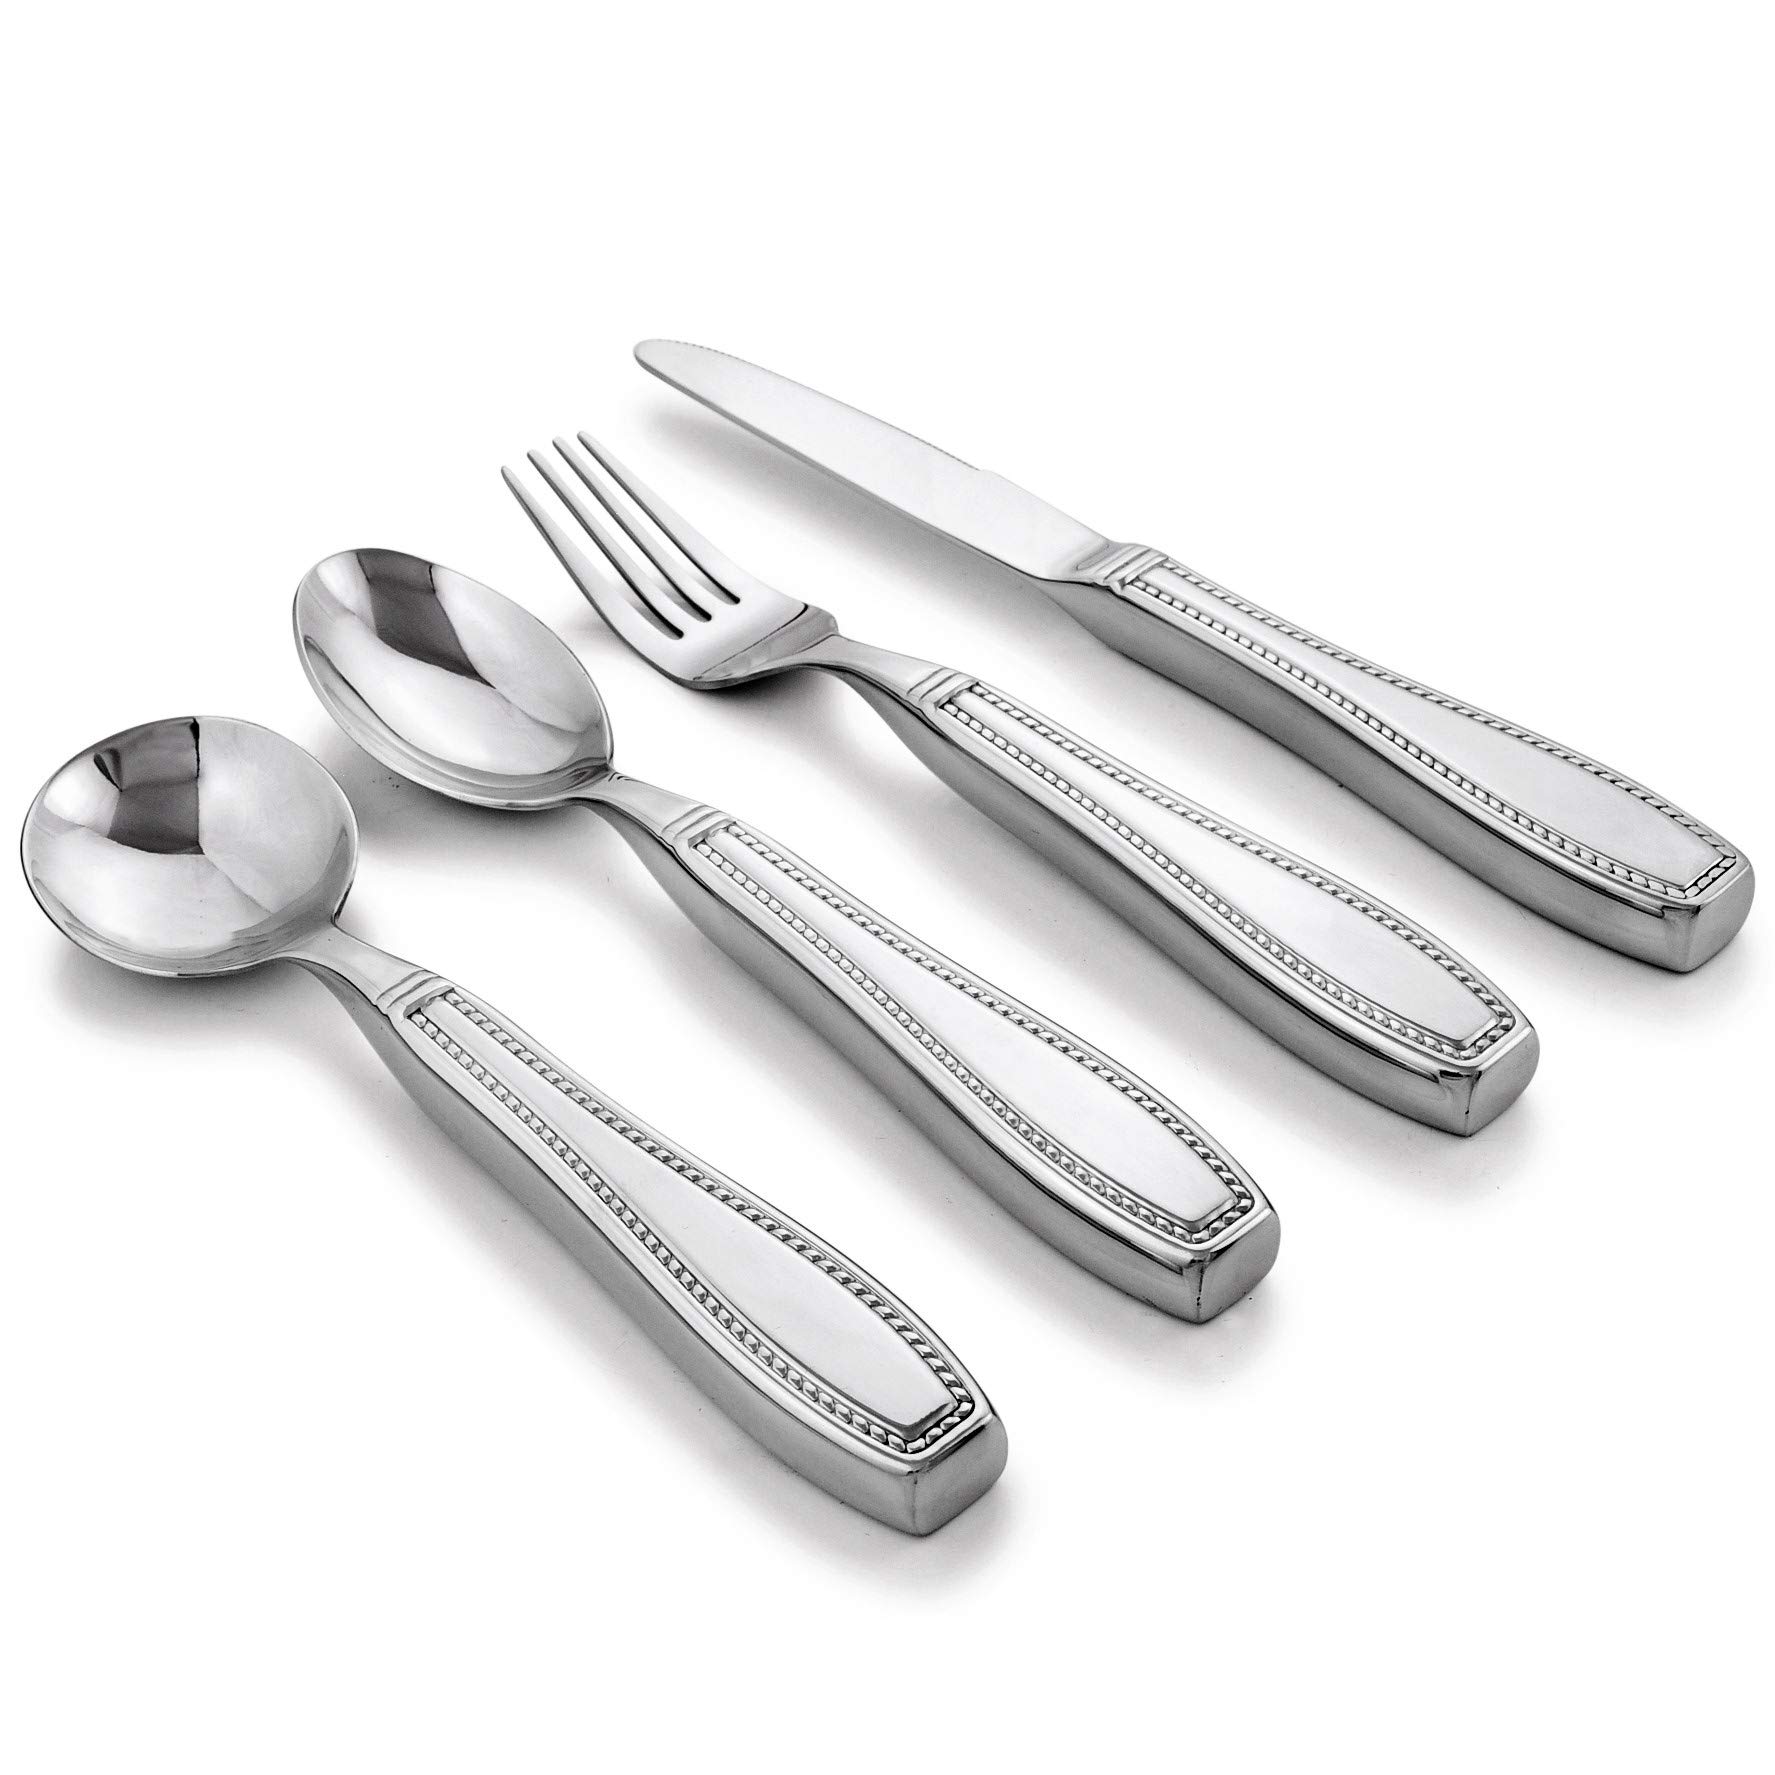 Weighted 7 oz Eating Utensils by Celley, 4pc Stainless Steel Knife Fork  Spoon Set for Tremors and Parkinsons Patients Old English Bead